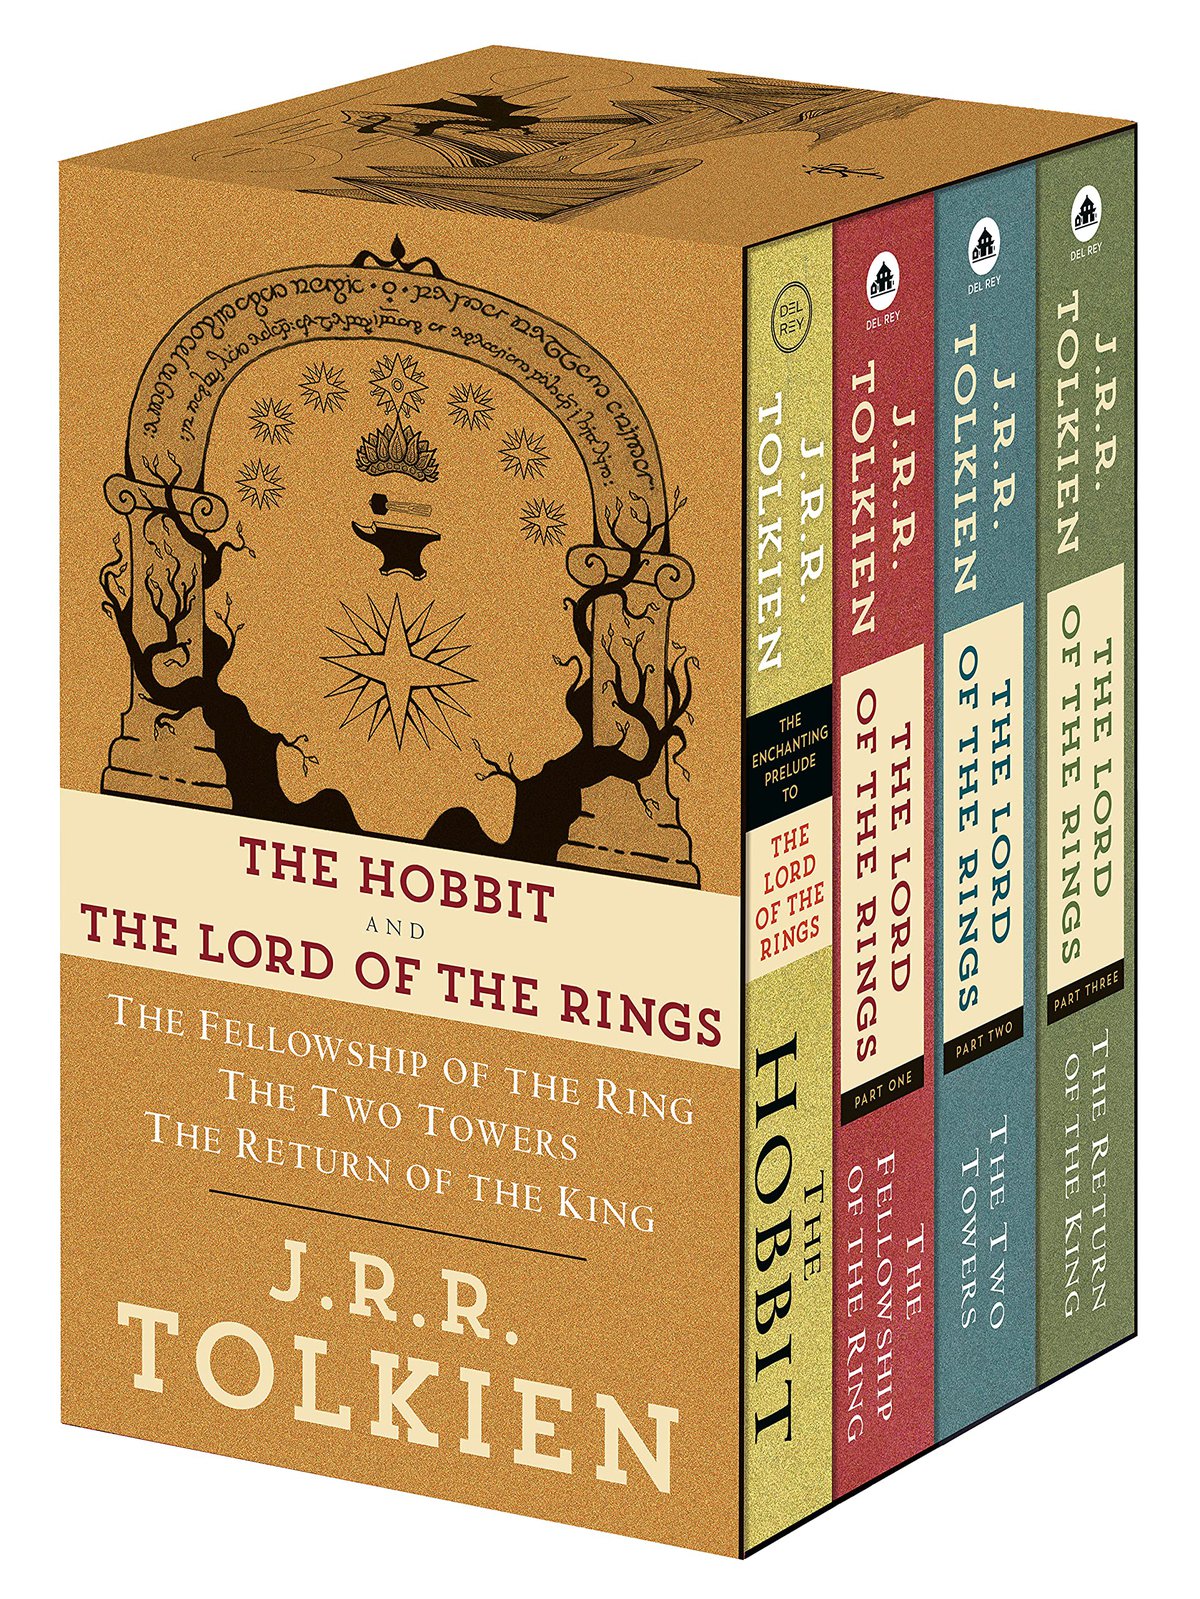 How to Celebrate J.R.R. Tolkien Day at Your Library